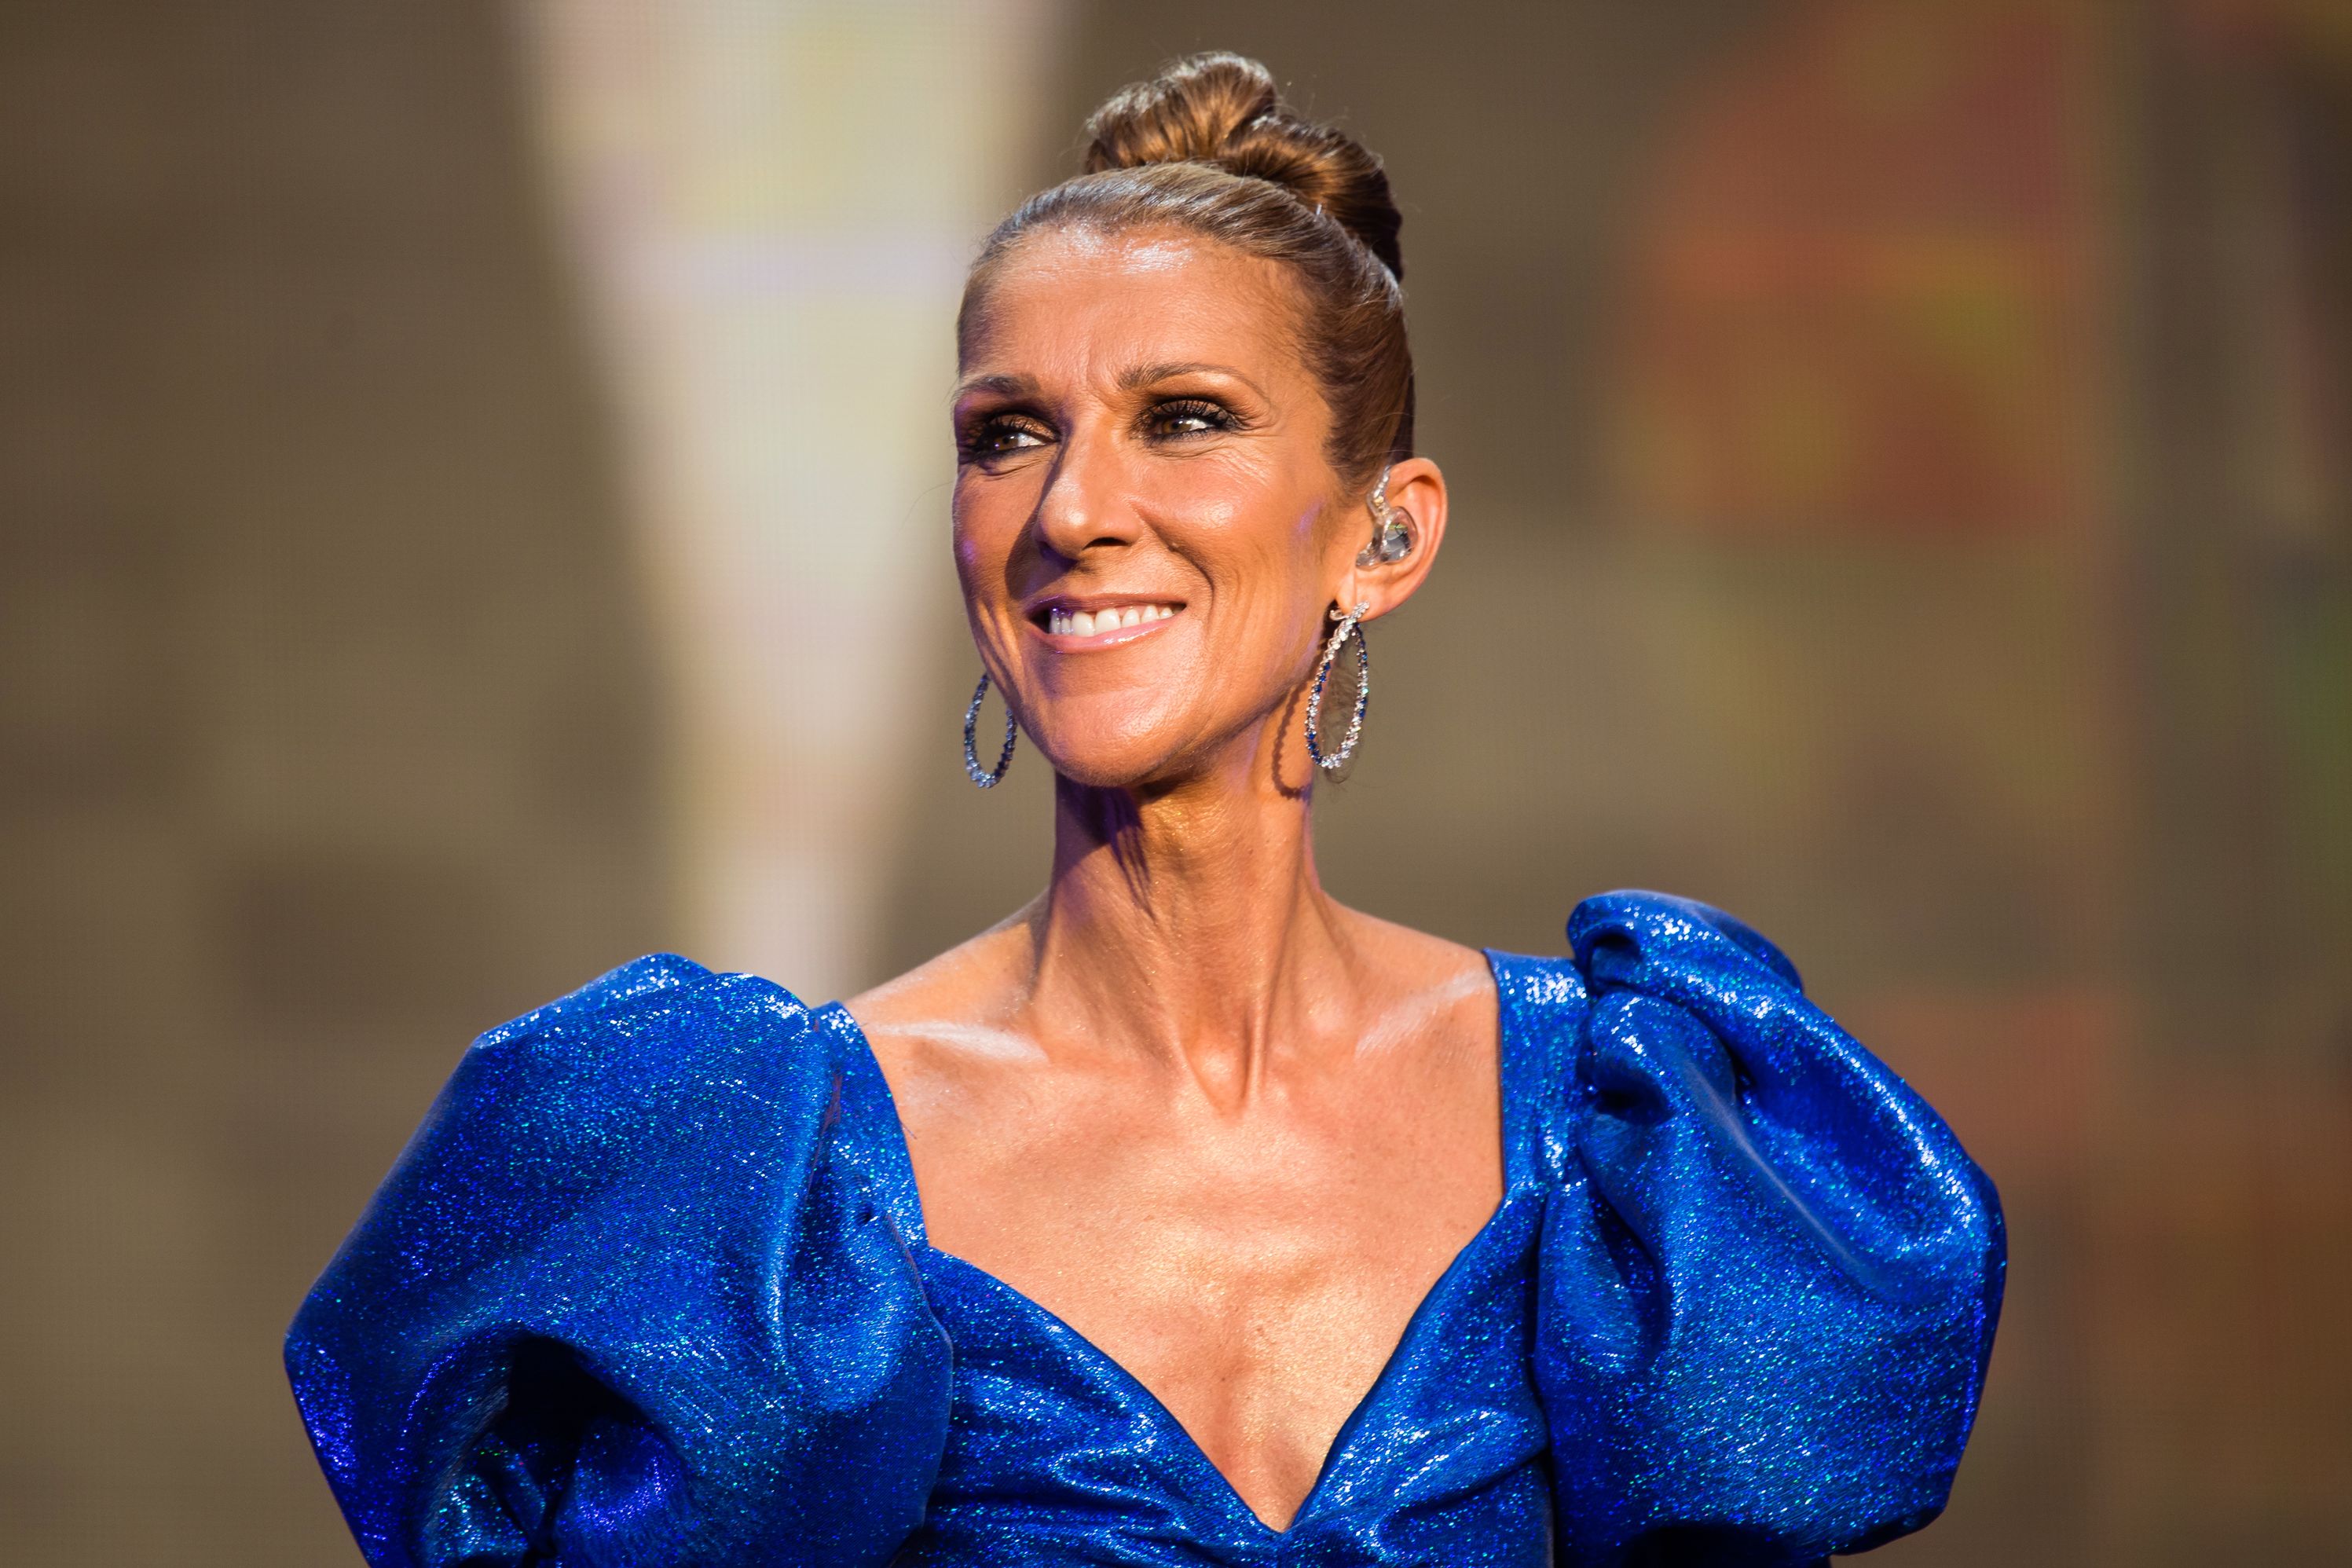 Canadian singer Celine Dion cancels rest of world tour due to medical condition